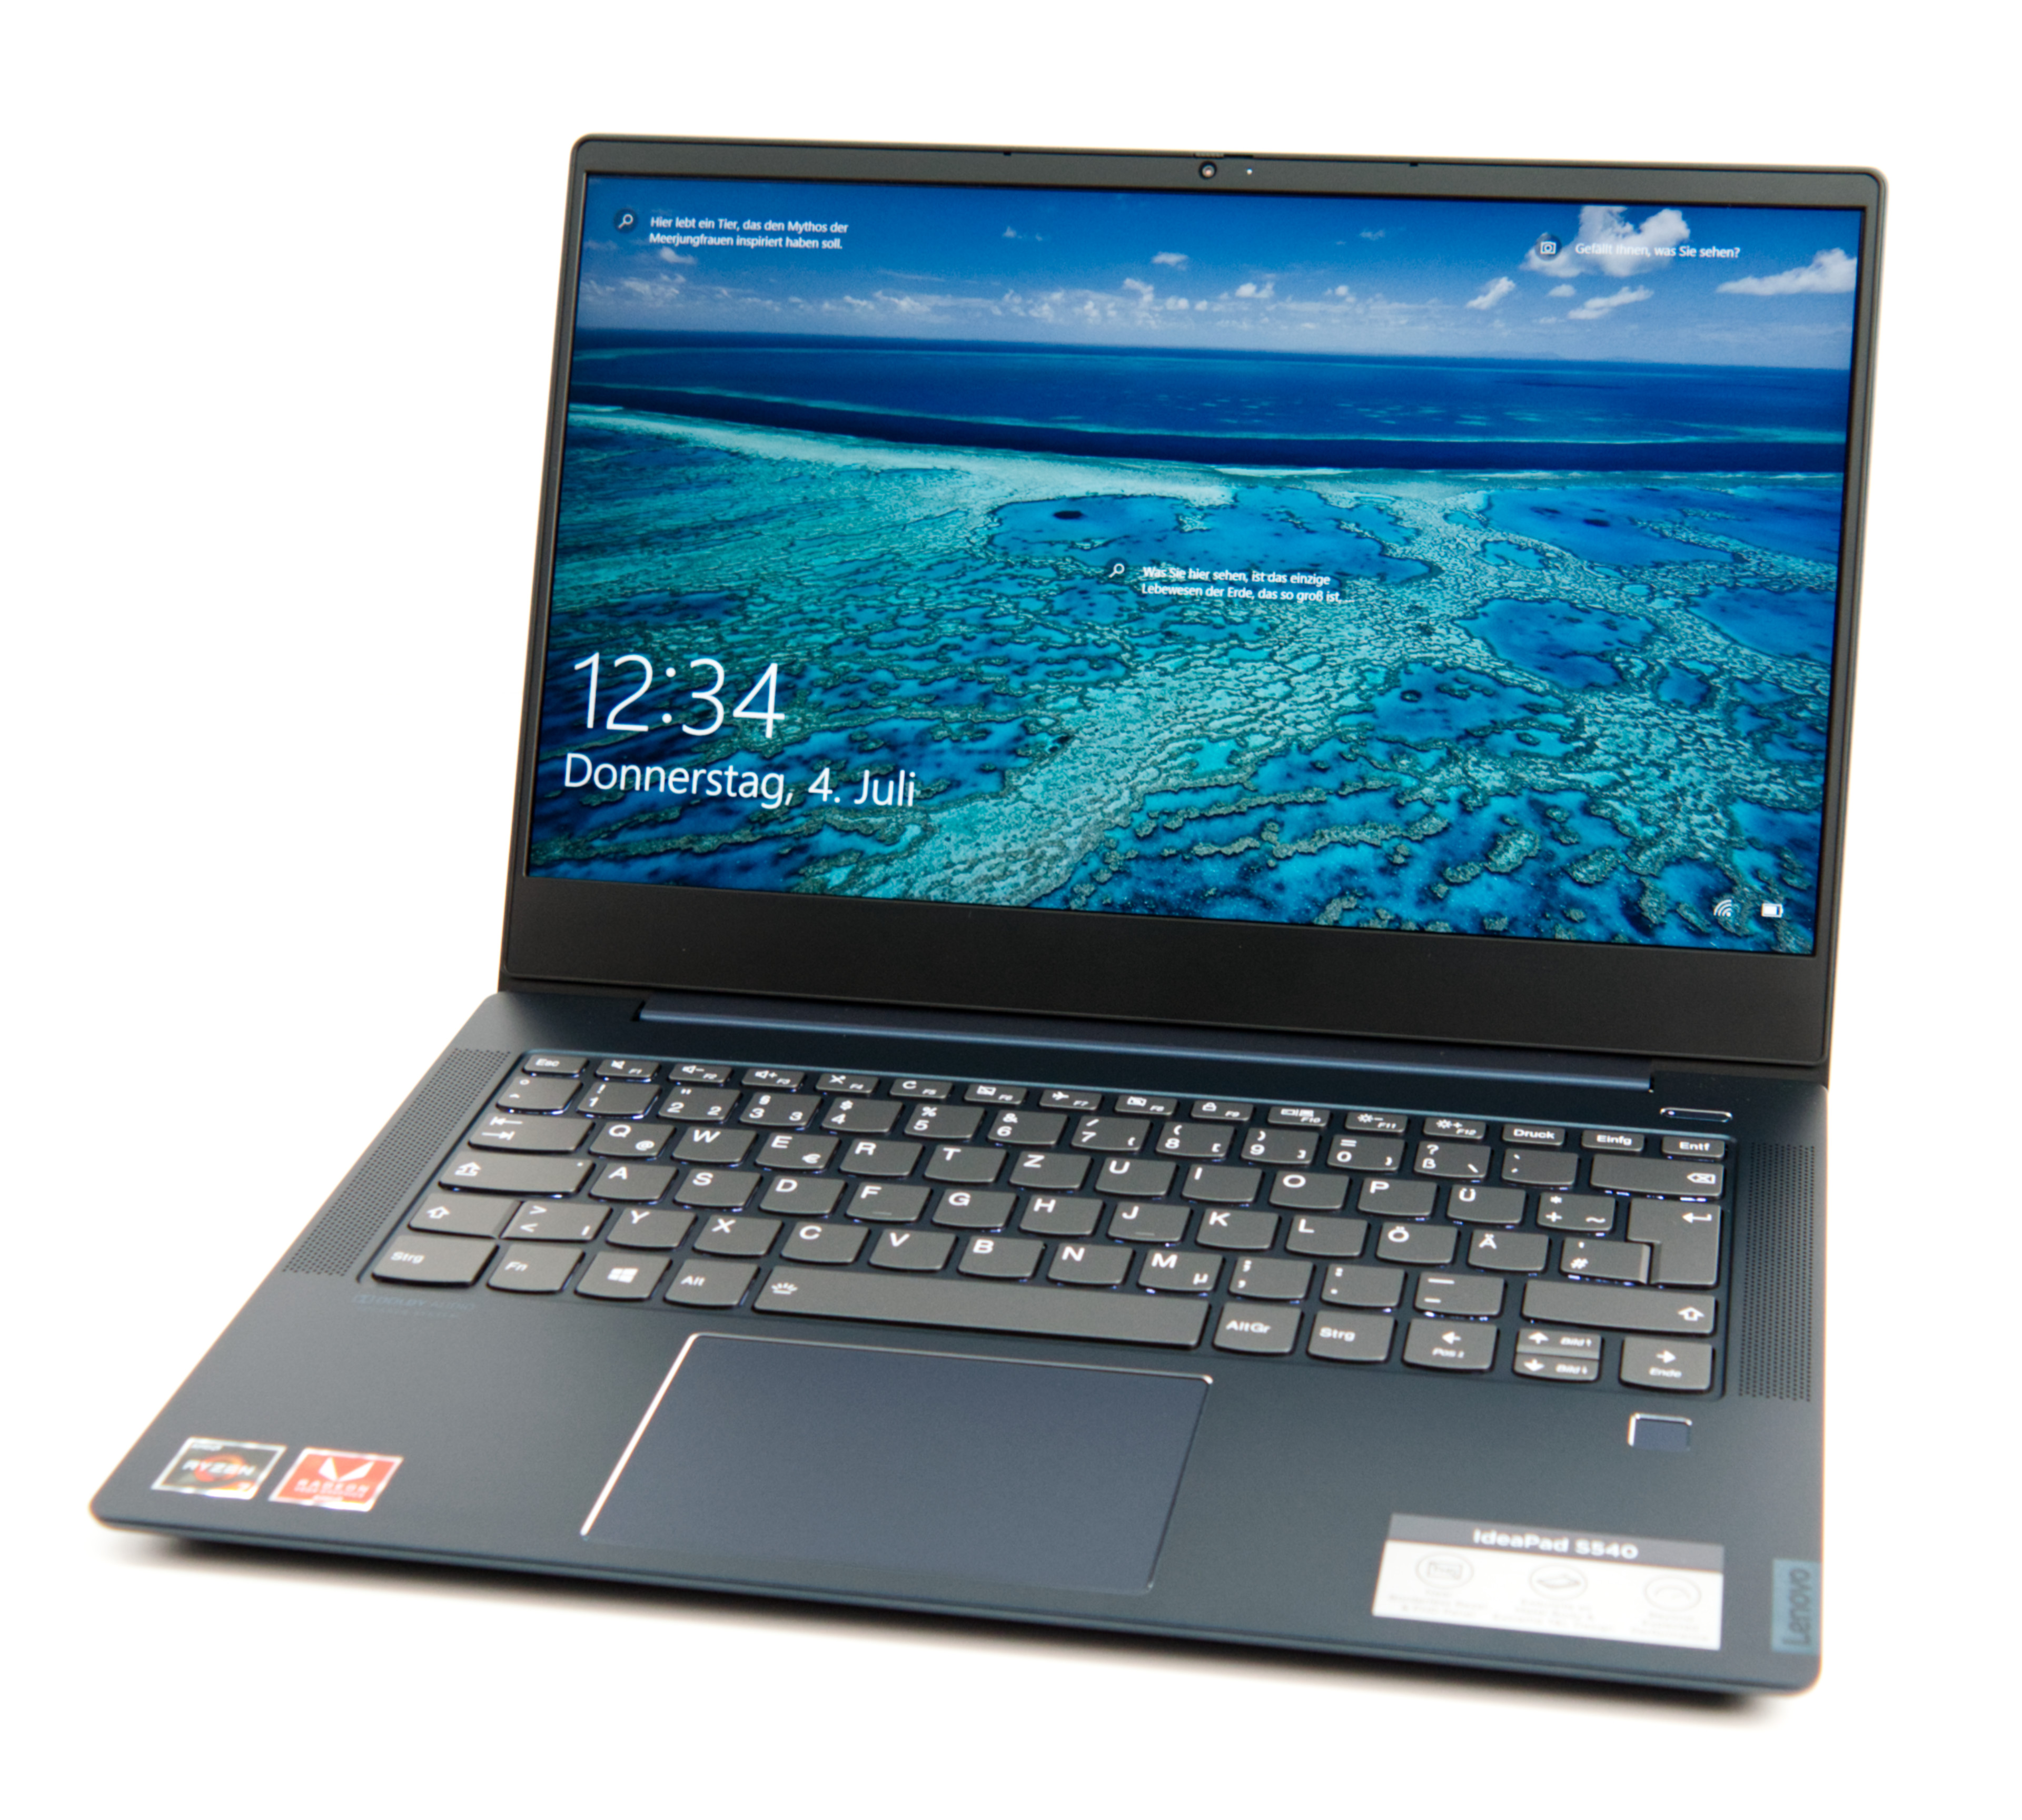 Lenovo Ideapad S540 Laptop Review Amd Or Intel Lenovo Gives Consumers The Choice And We Compare Both Notebookcheck Net Reviews